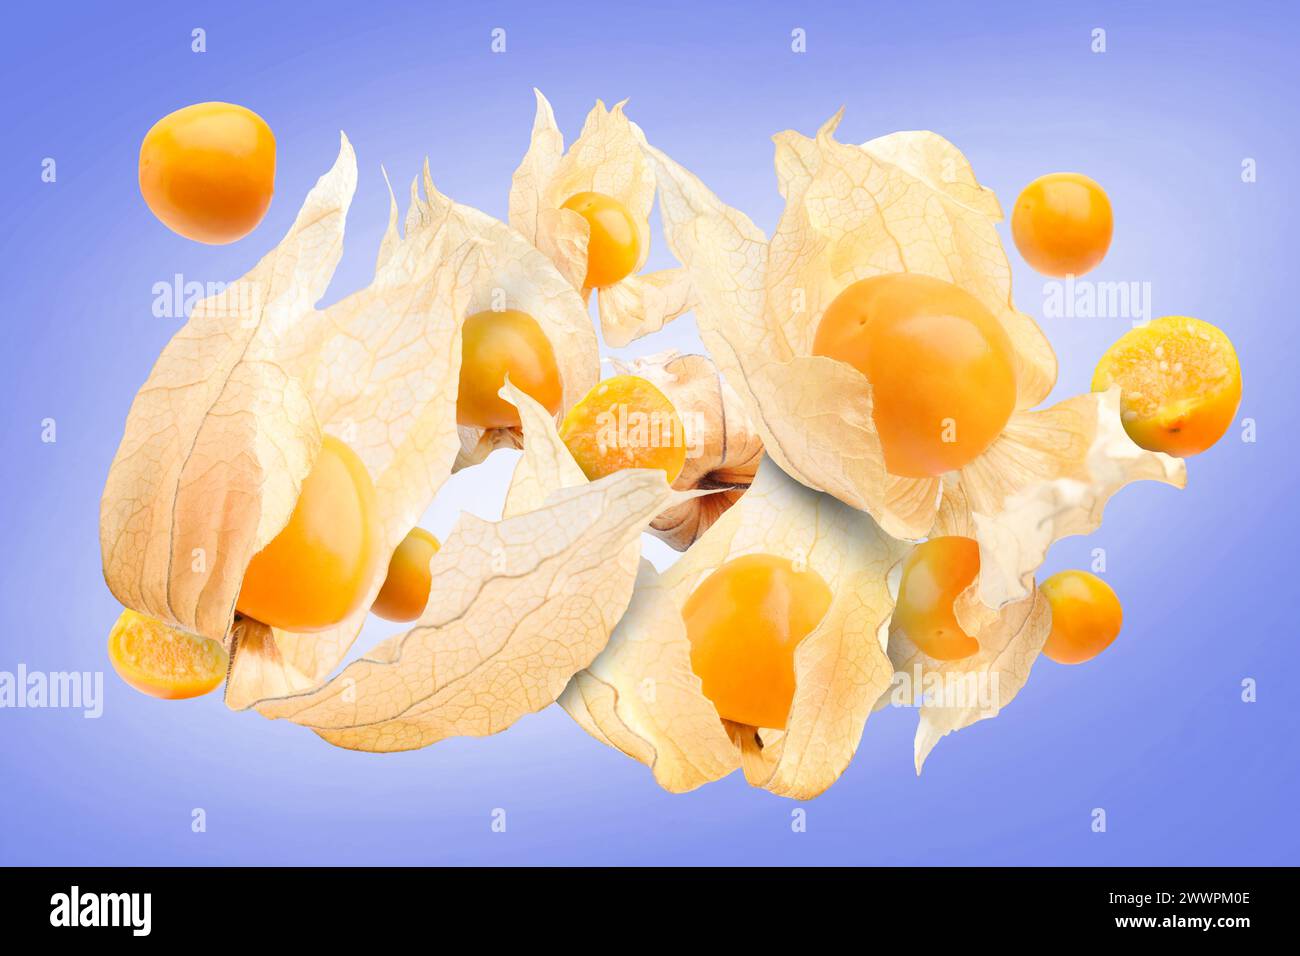 Ripe orange physalis fruits with calyx falling on color gradient background Stock Photo